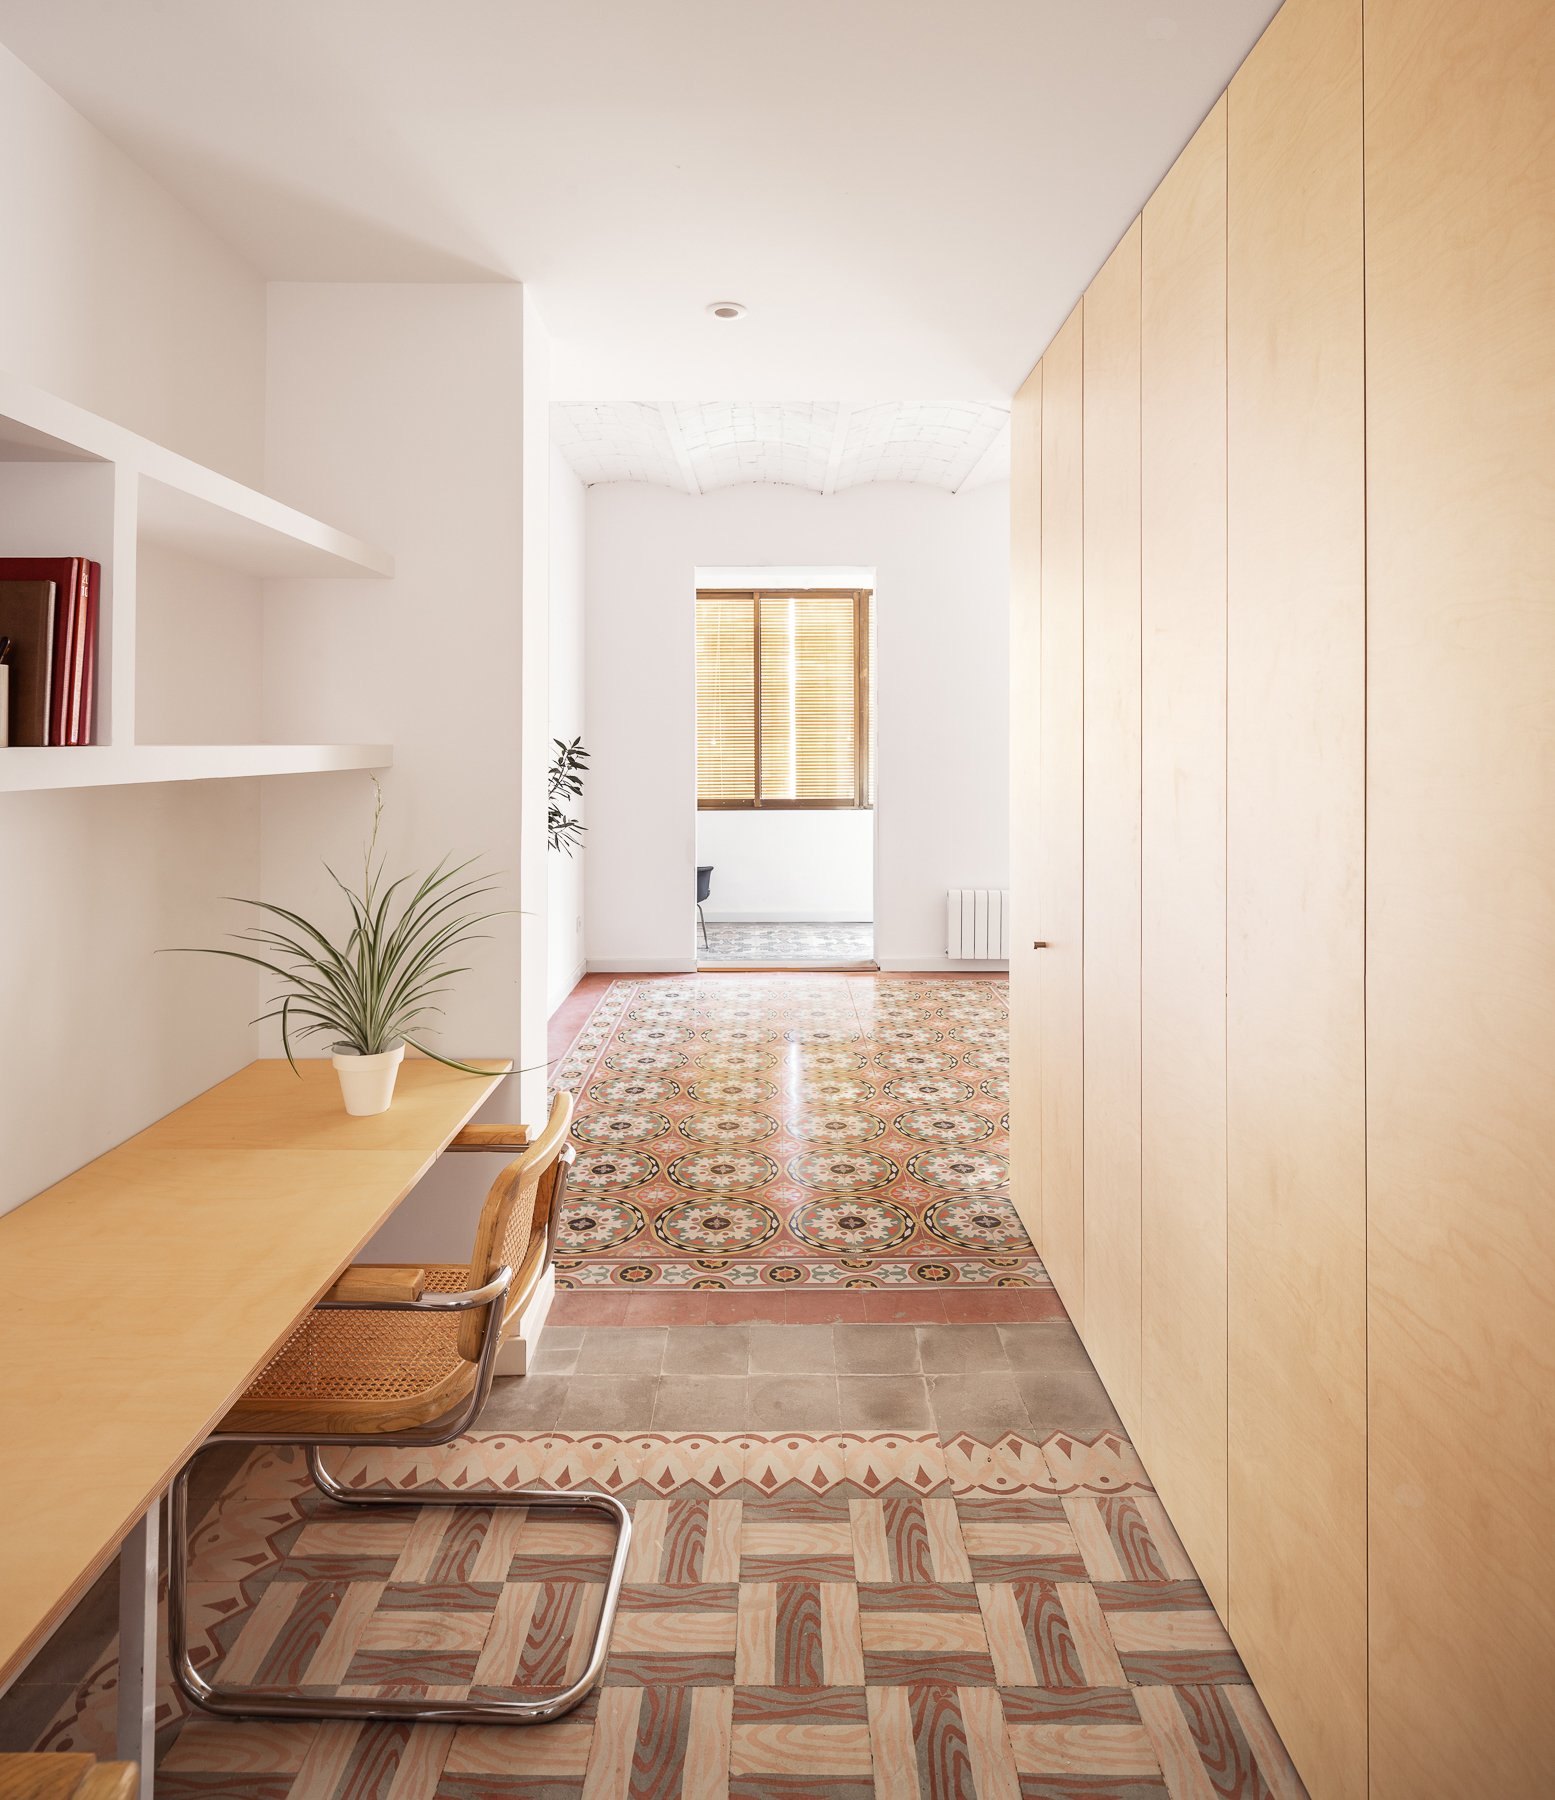 Apartment in Barcelona, Spain by Parramon + Tahull Arquitectes